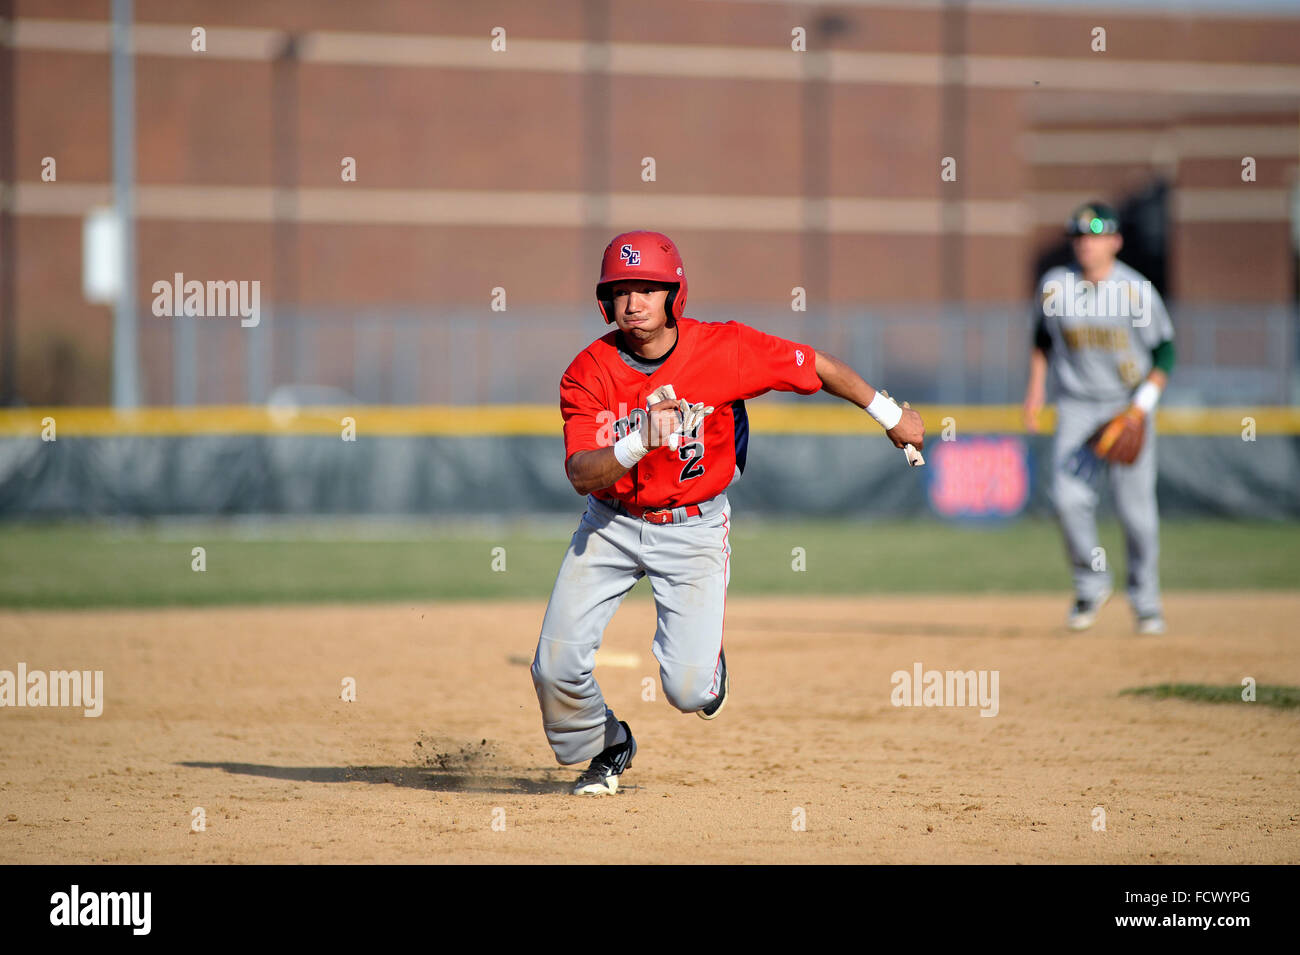 High school runner putting it into gear as he watches ground ball head into left field that allowed him to come around to score. USA. Stock Photo